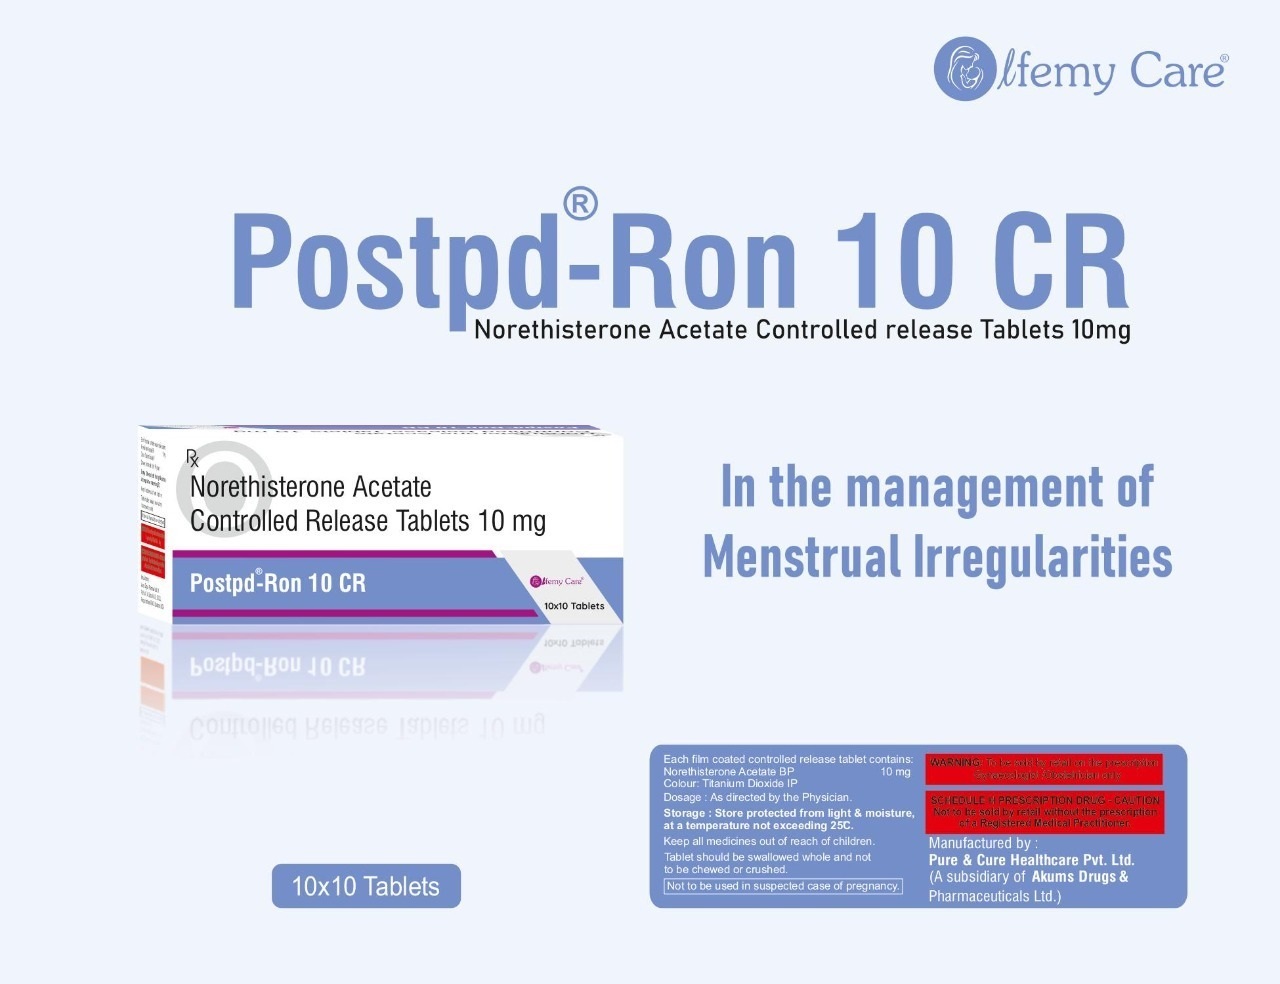 Product Name: Postpd Ron 10 CR, Compositions of are Norethisterone Acetate Controlled Release Tablets 10 mg - Olfemy Care